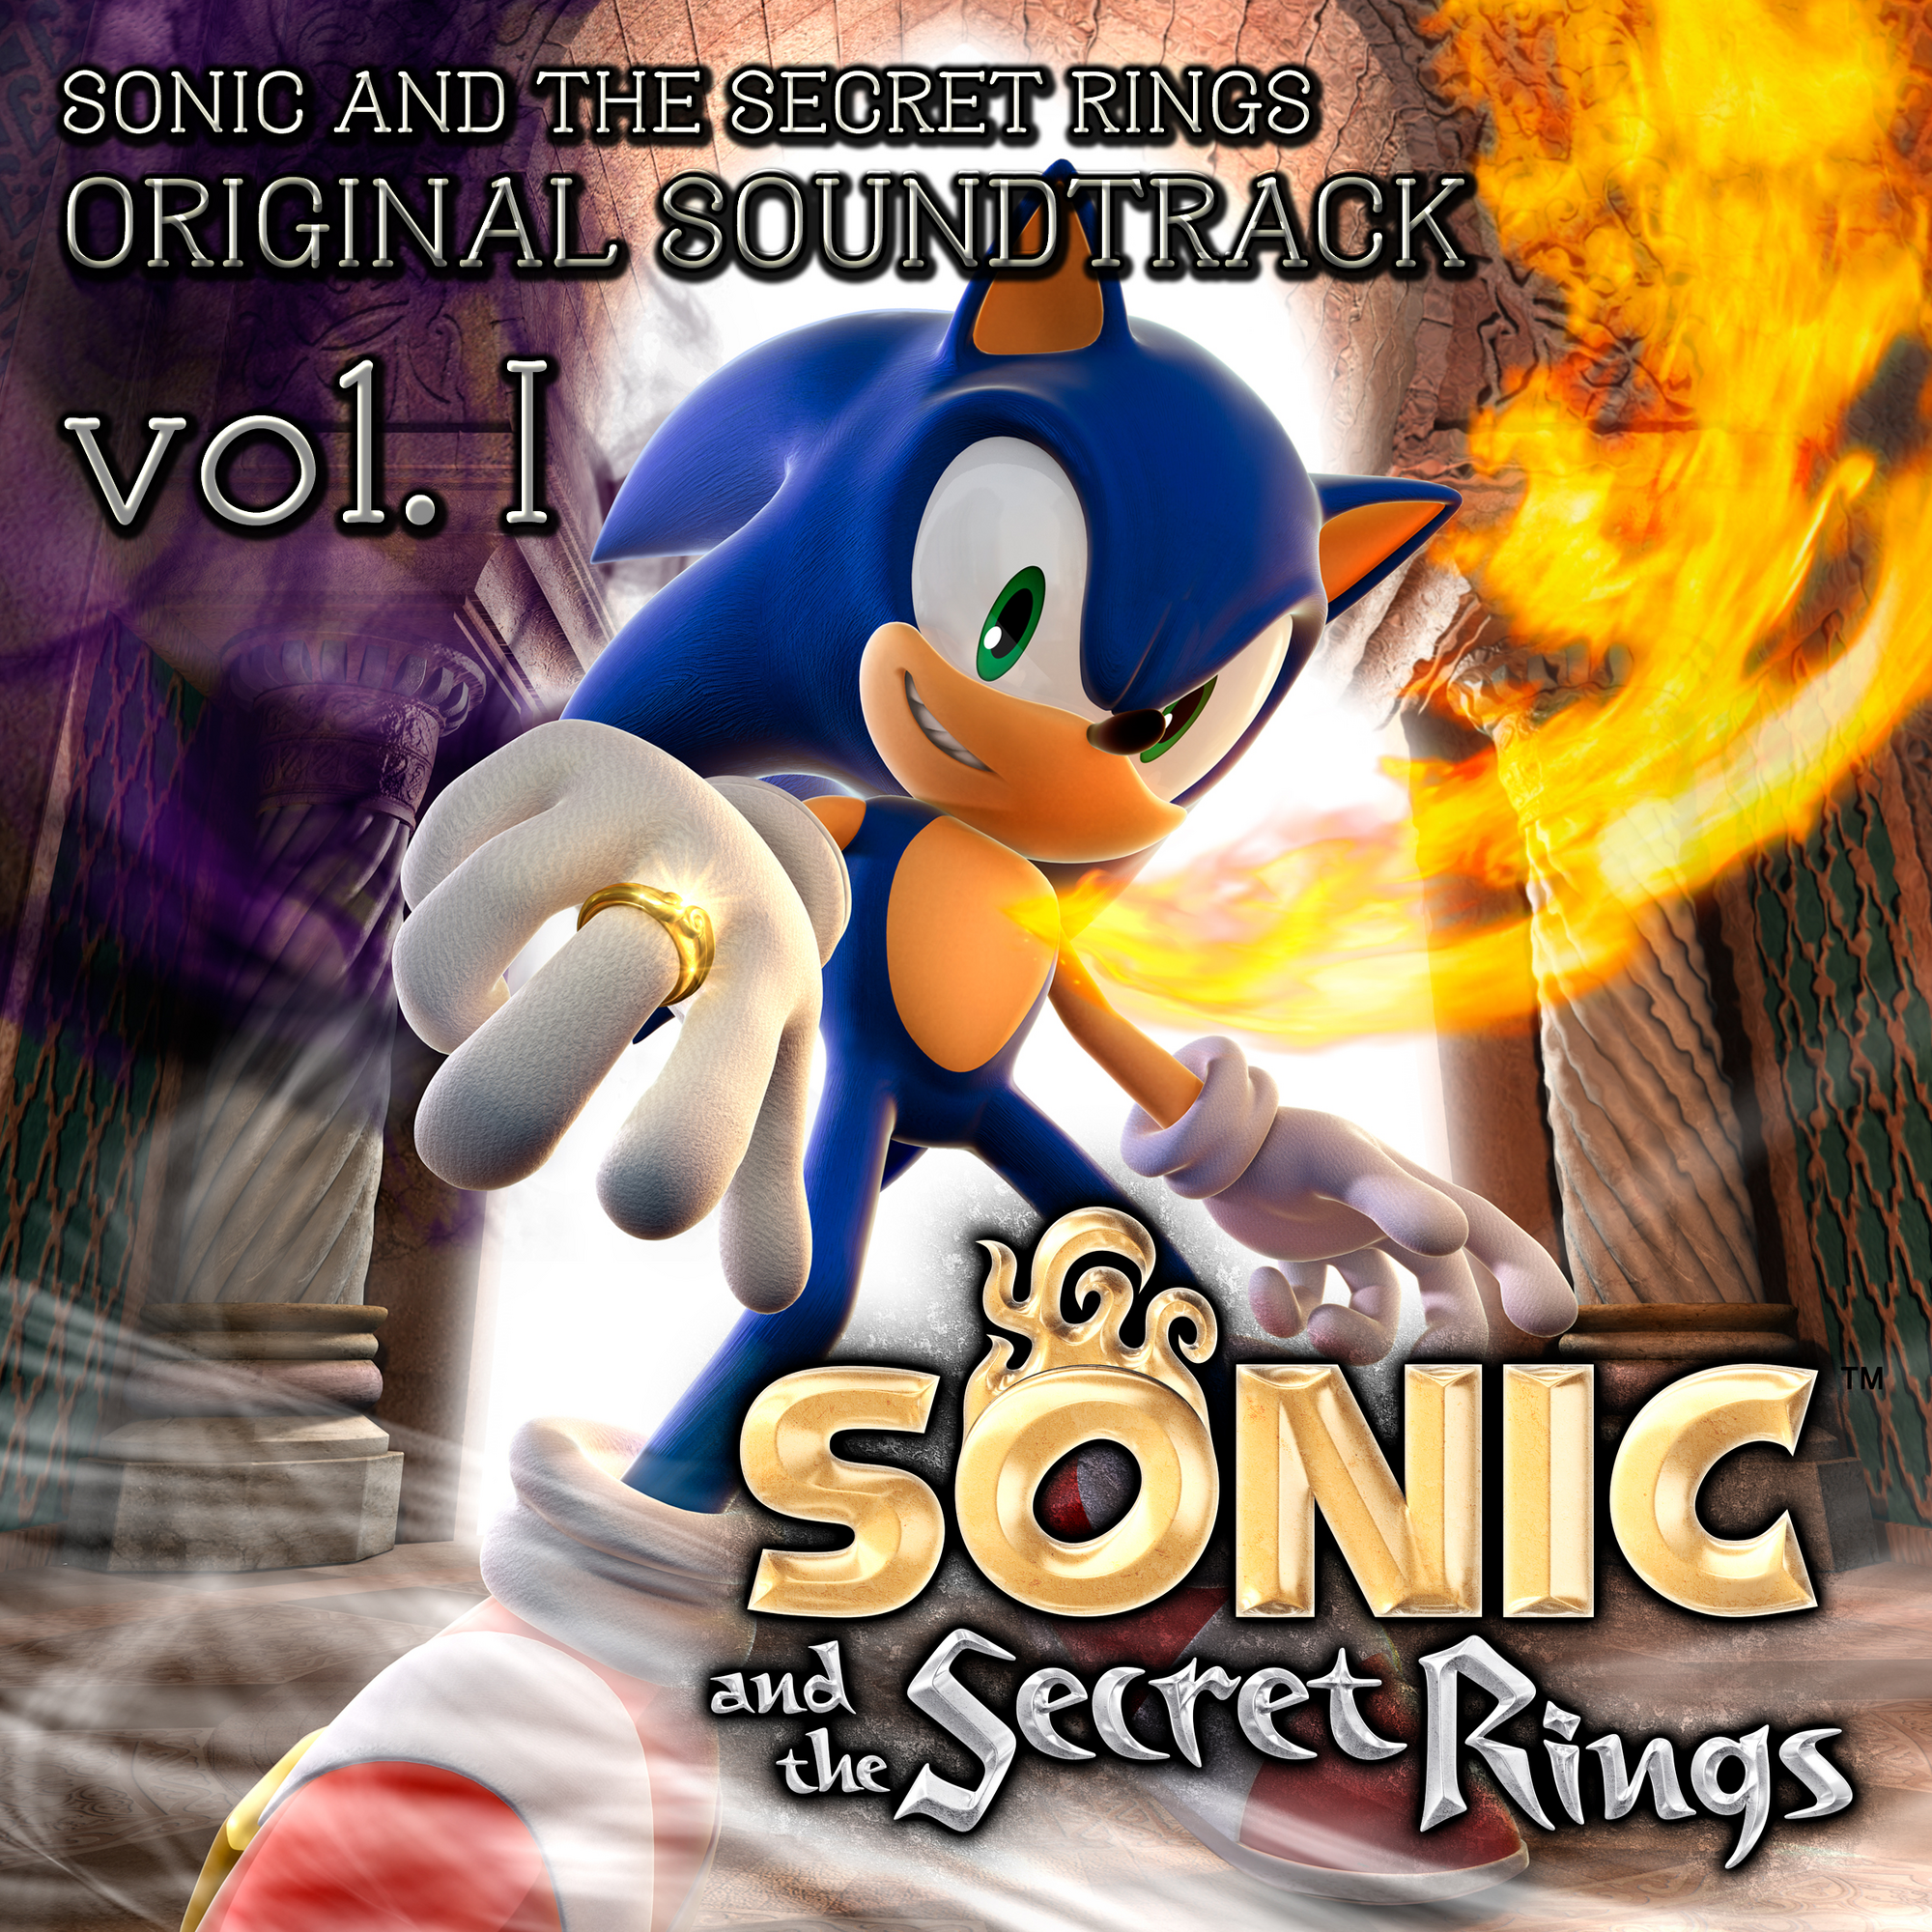 Seven Rings In Hand: Sonic and the Secret Rings Original Sound Track